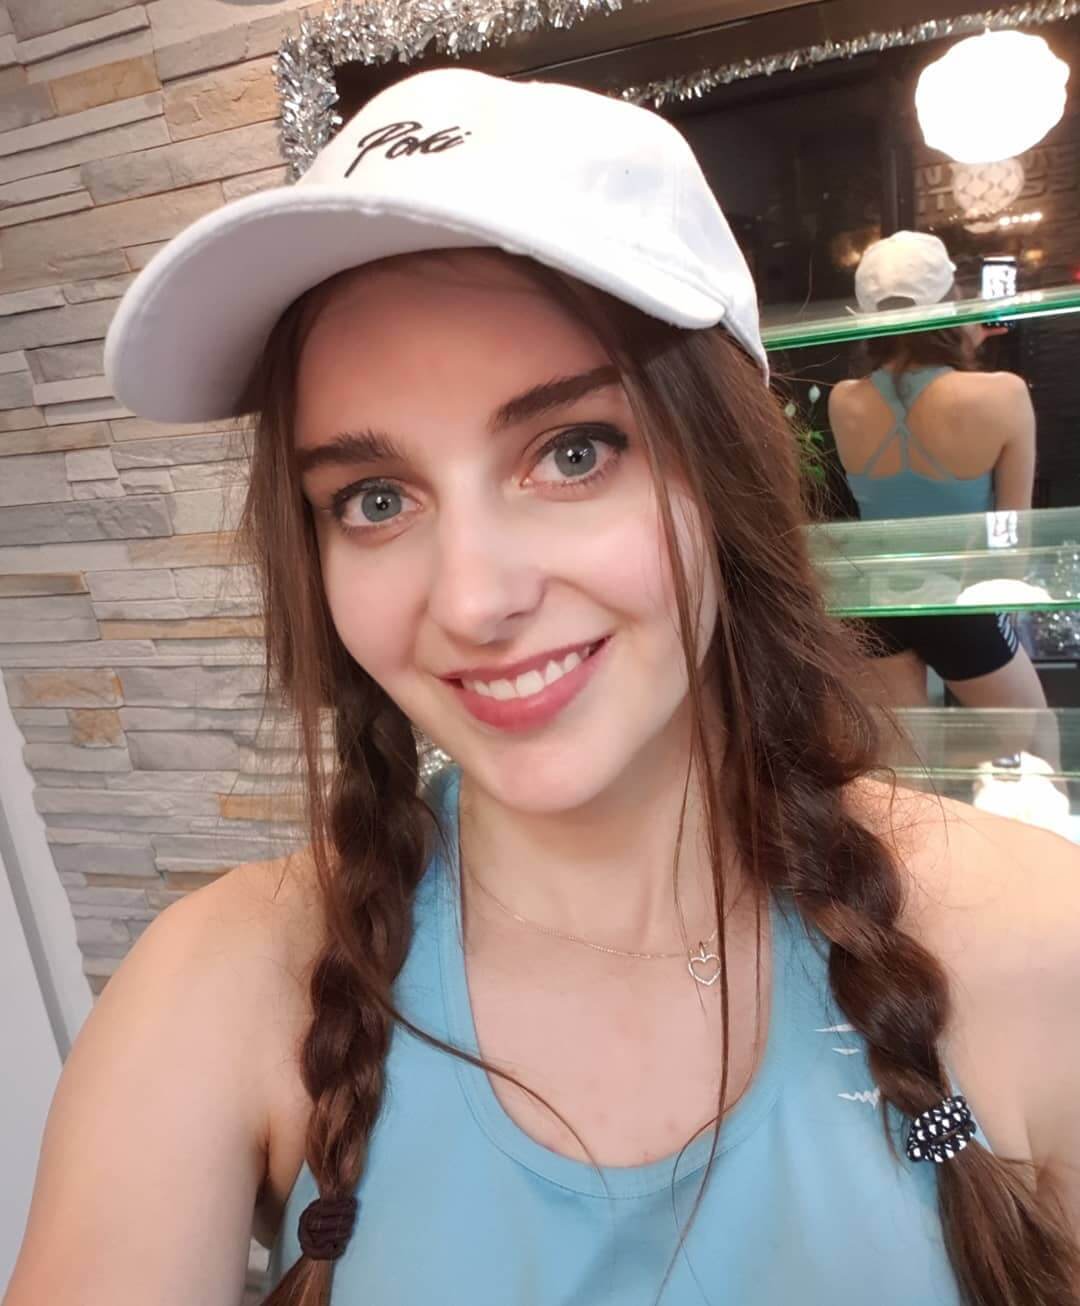 Loserfruit hot pictures are too much for you to handle.